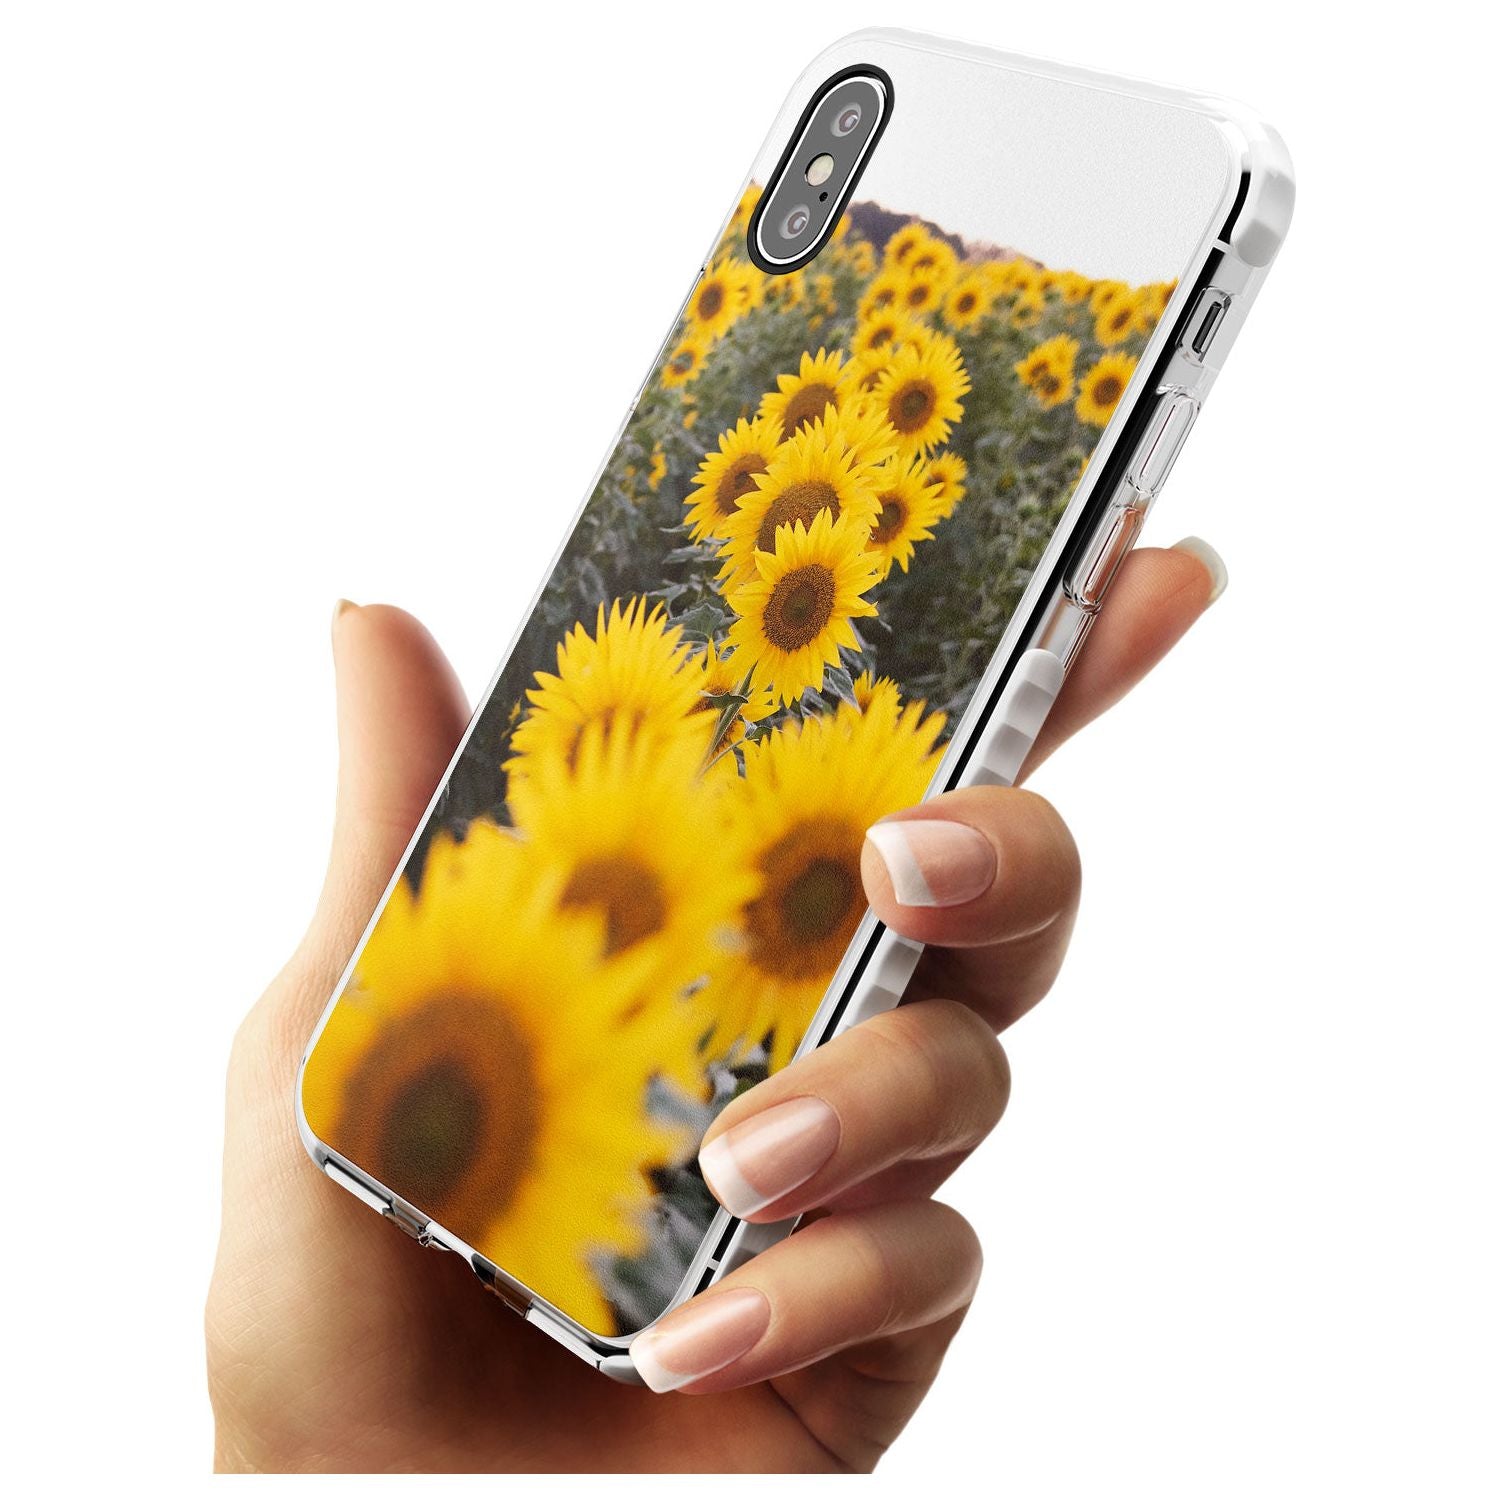 Sunflower Field Photograph Impact Phone Case for iPhone X XS Max XR